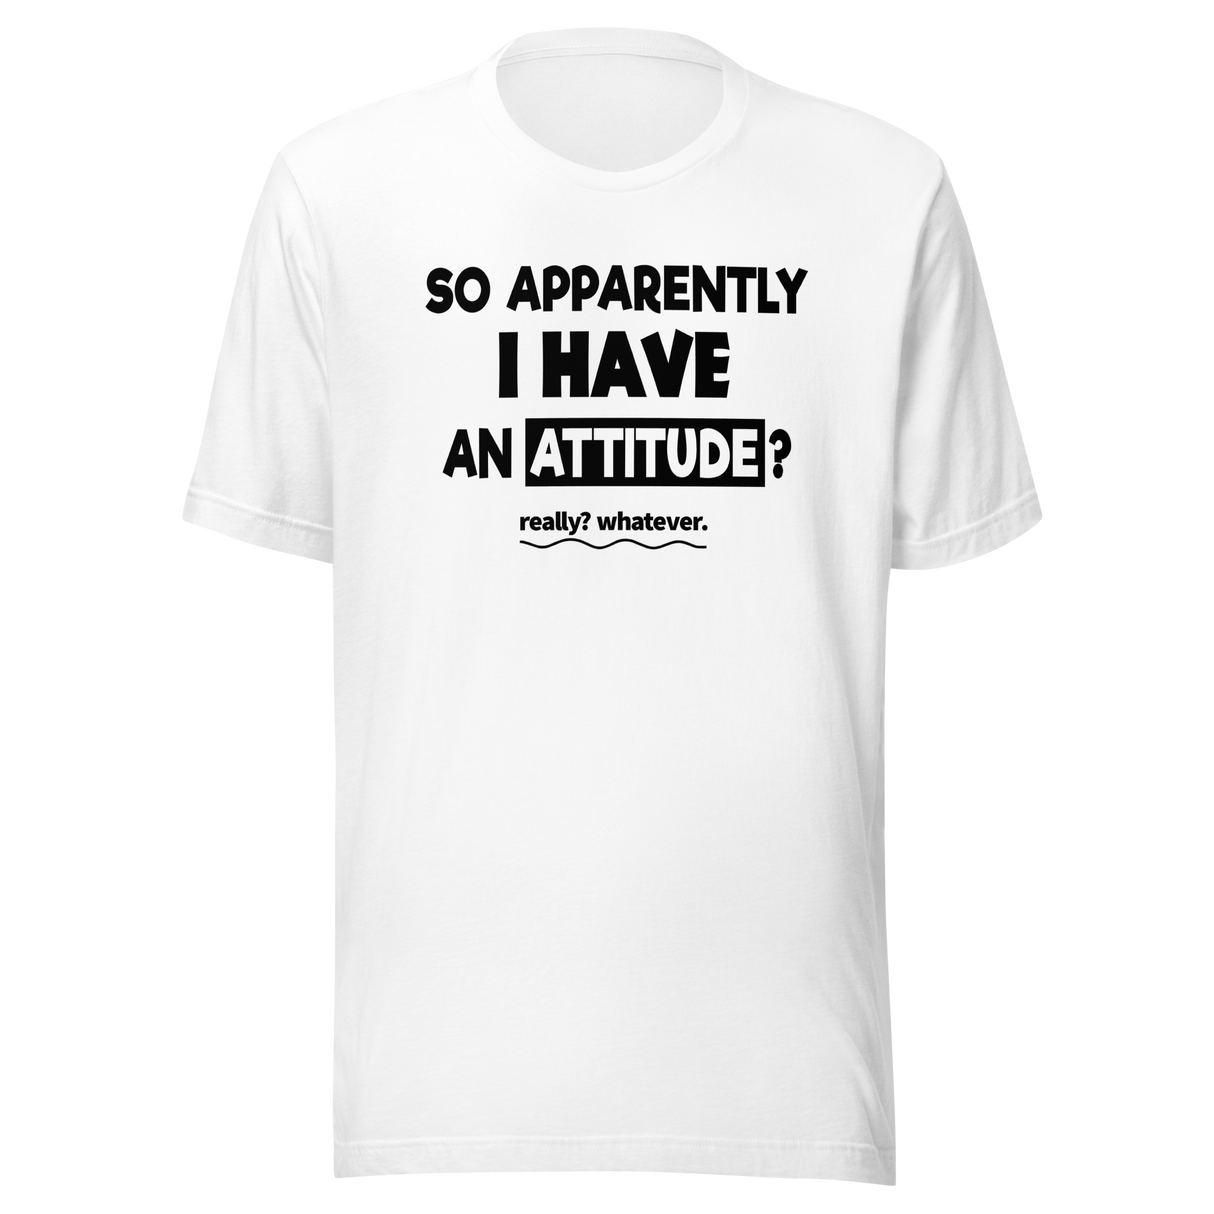 so-apparently-i-have-an-attitude-whatever-life-tee-funny-t-shirt-attitude-tee-casual-t-shirt-statement-tee#color_white